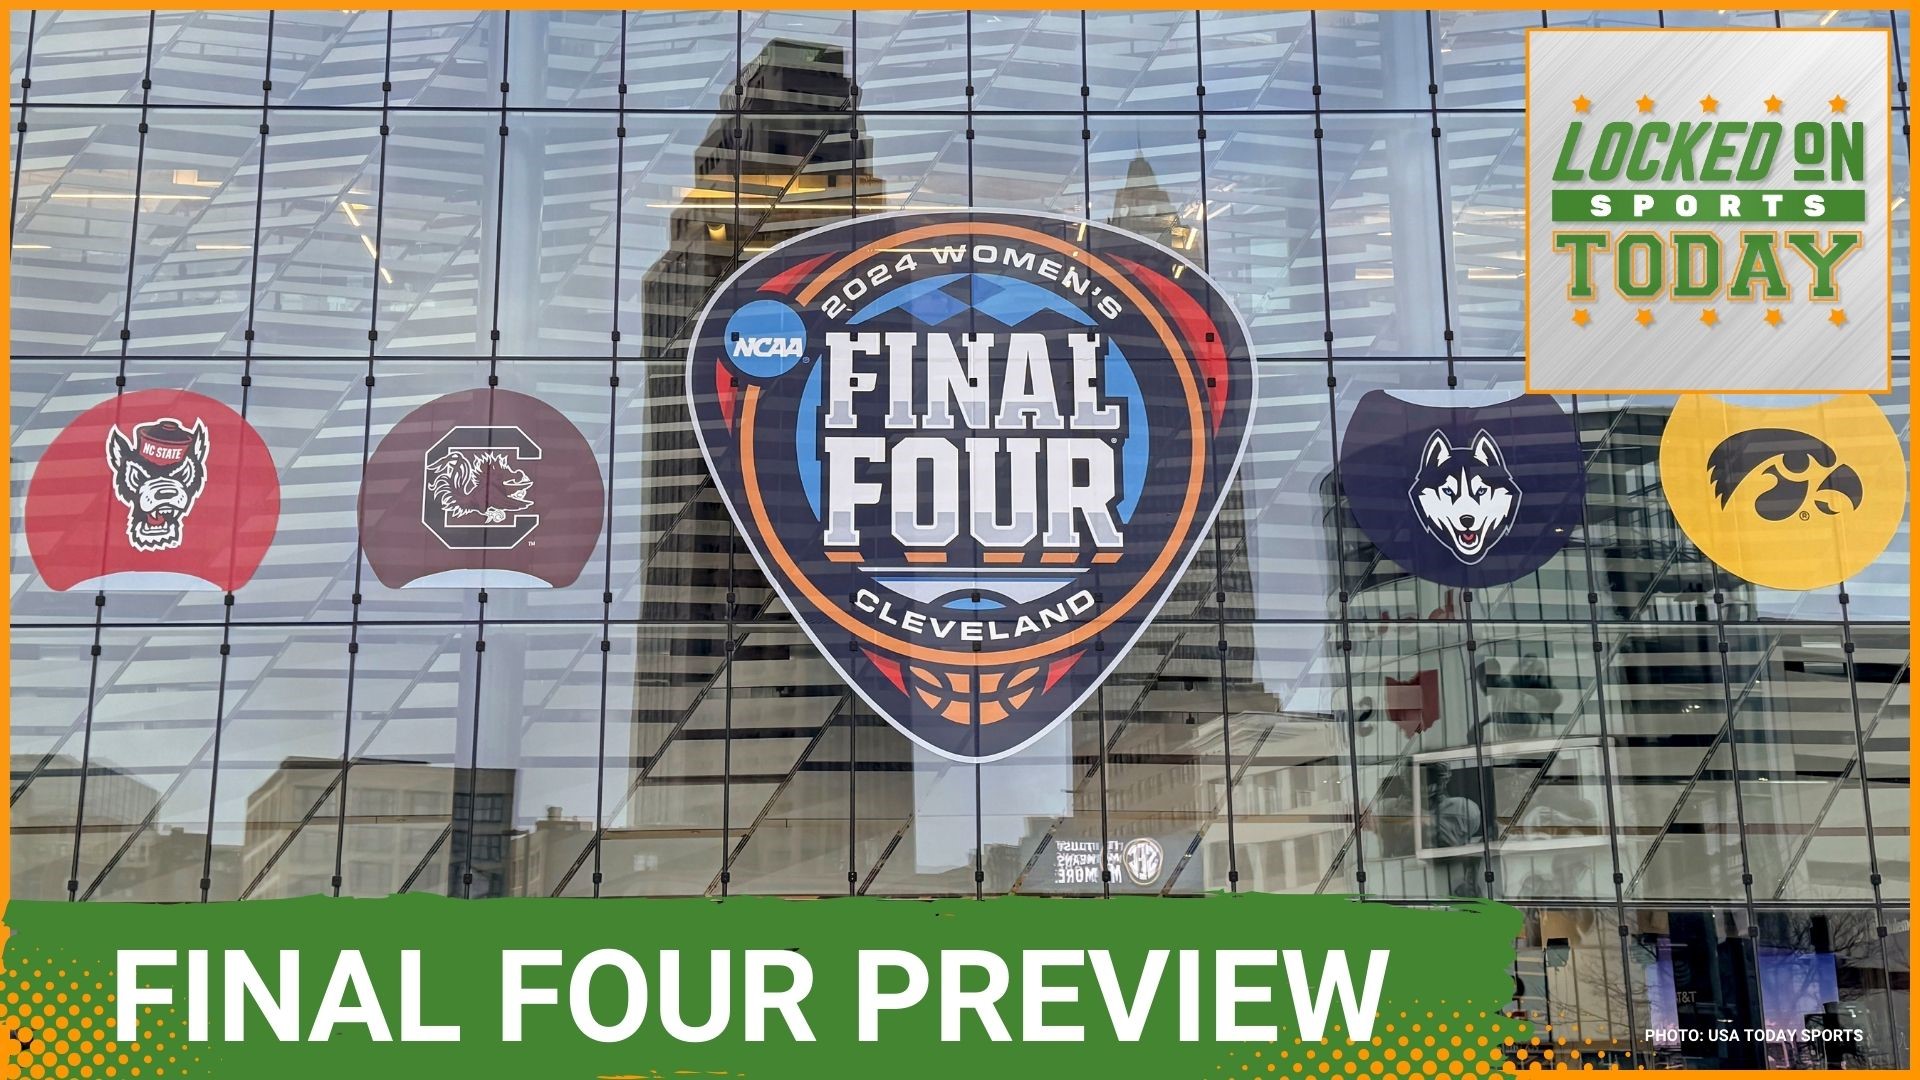 Discussing the day's top sports stories from a Final Four preview to NC State's unlikely run and the solar eclipse and baseball.